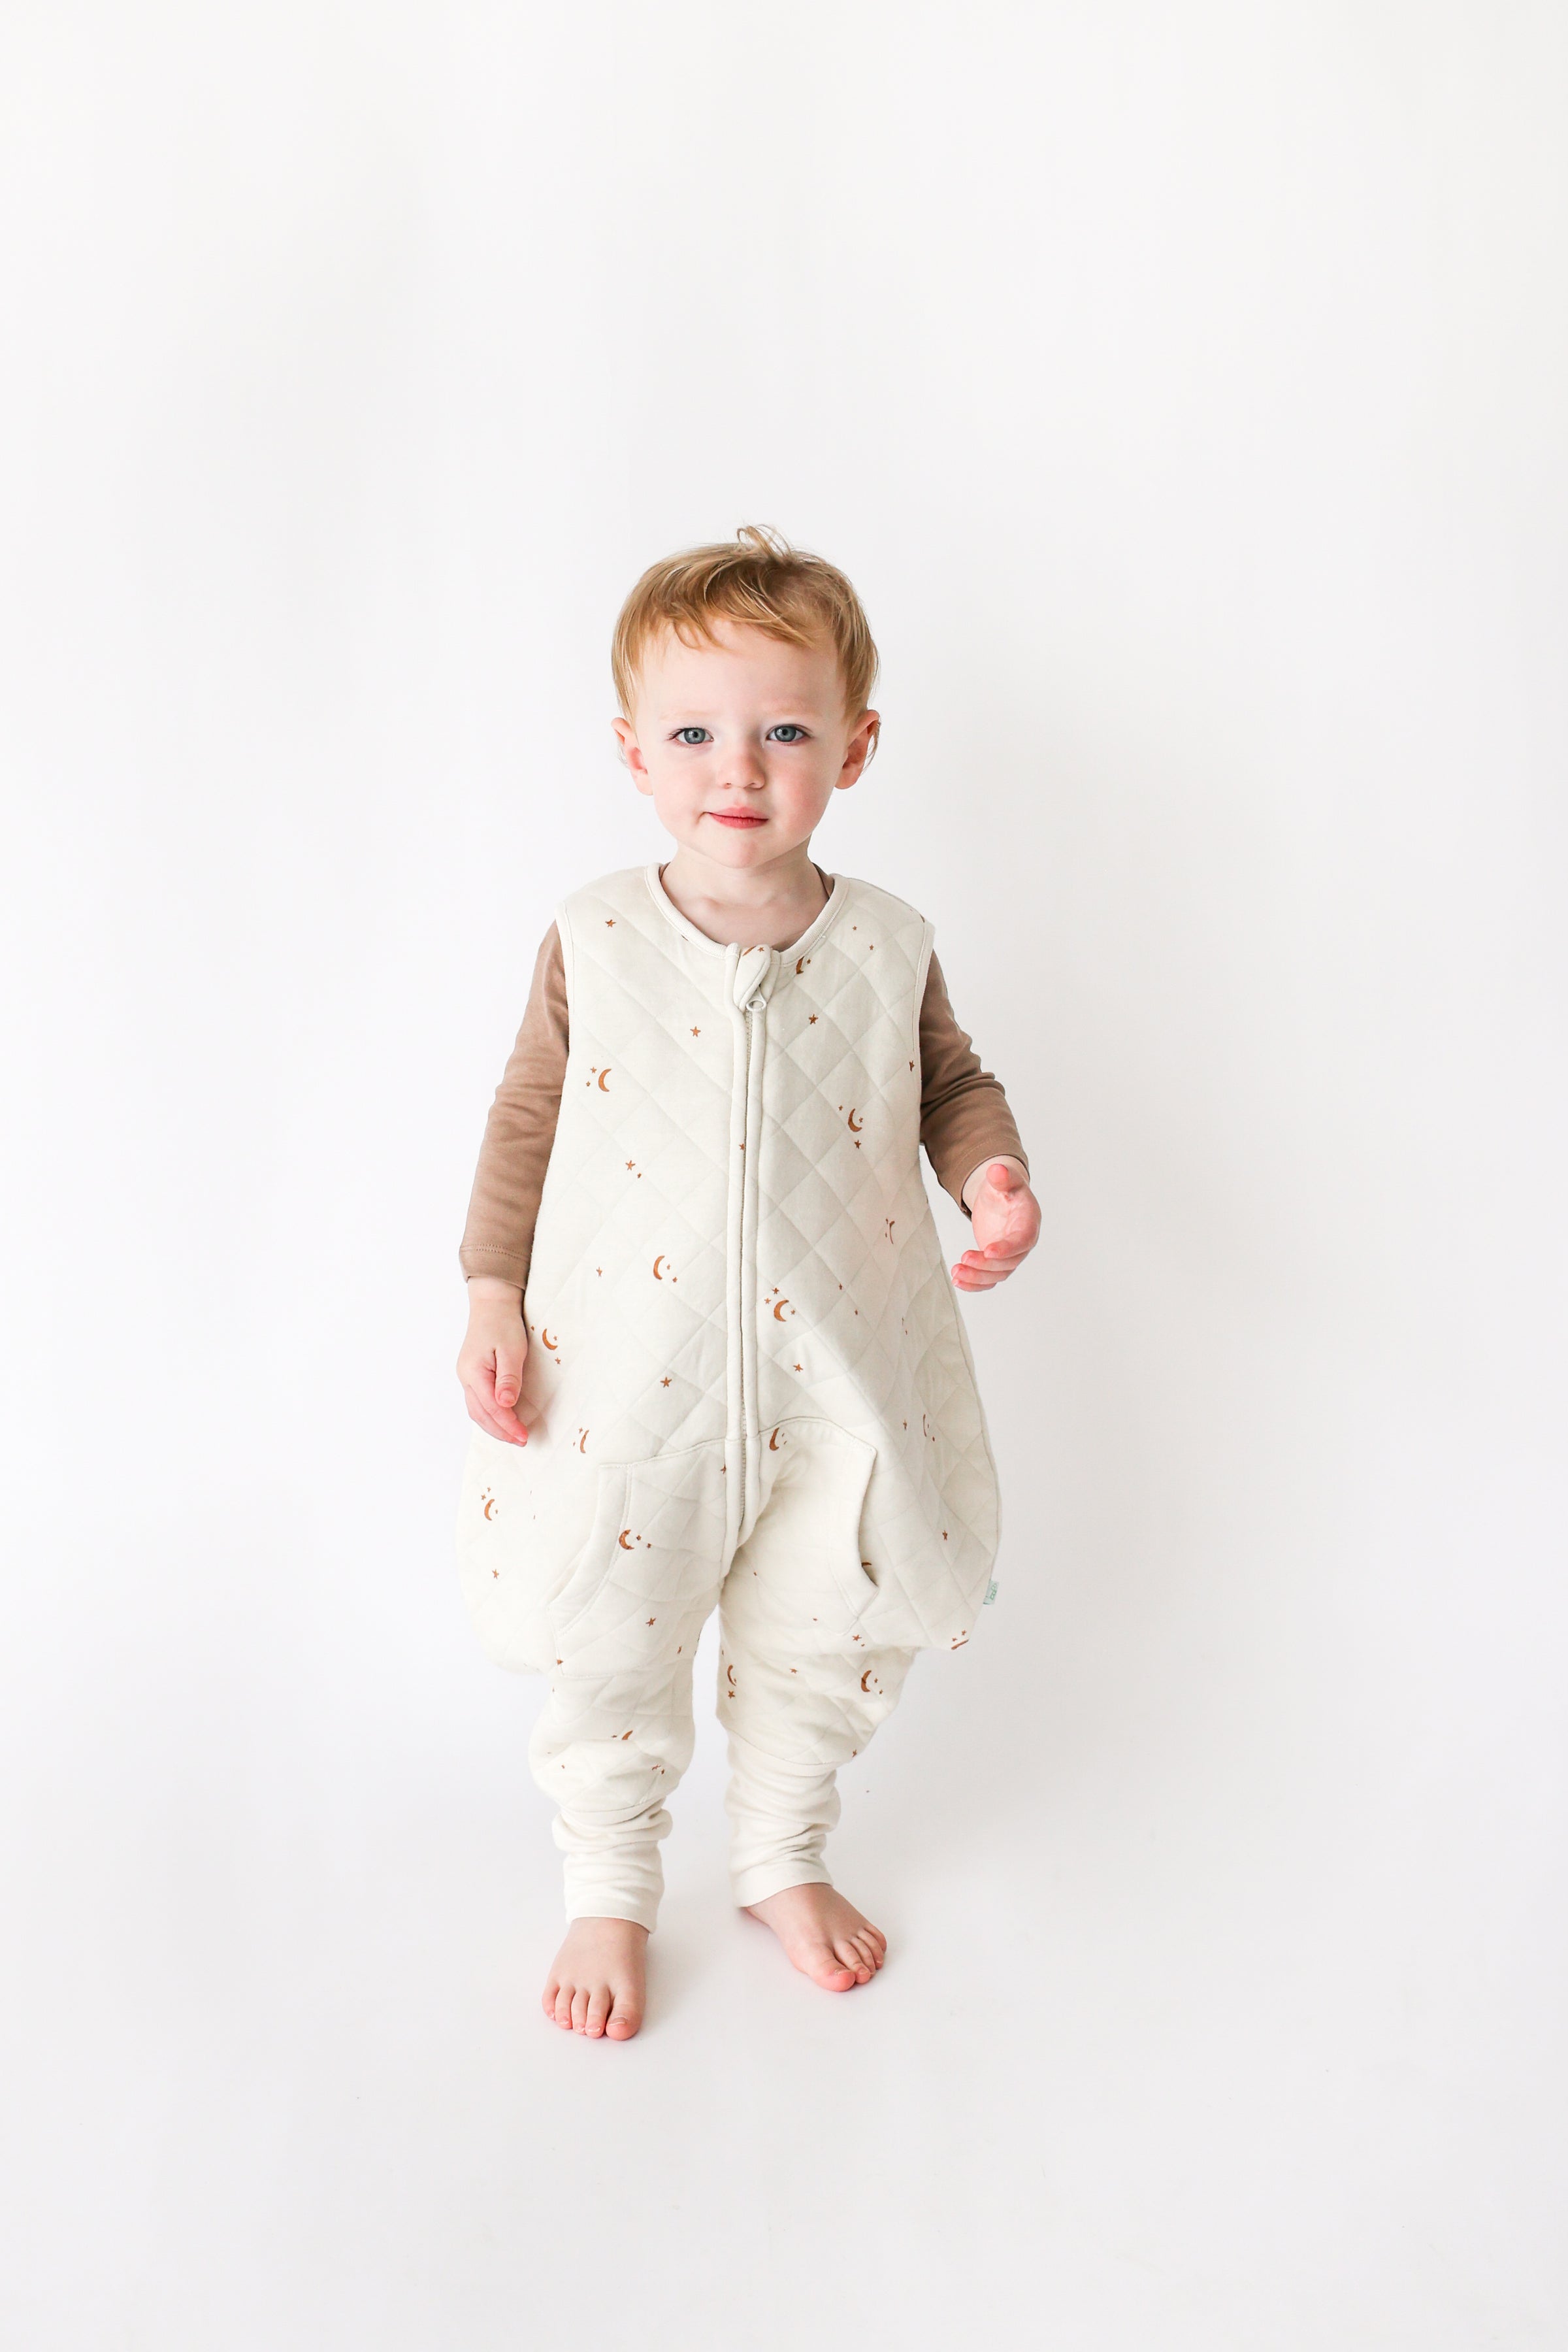 Shop the complete collection of Tealbee sleep sacks in 2T-3T sizes, availalbe in 2 styles and 3 TOGs